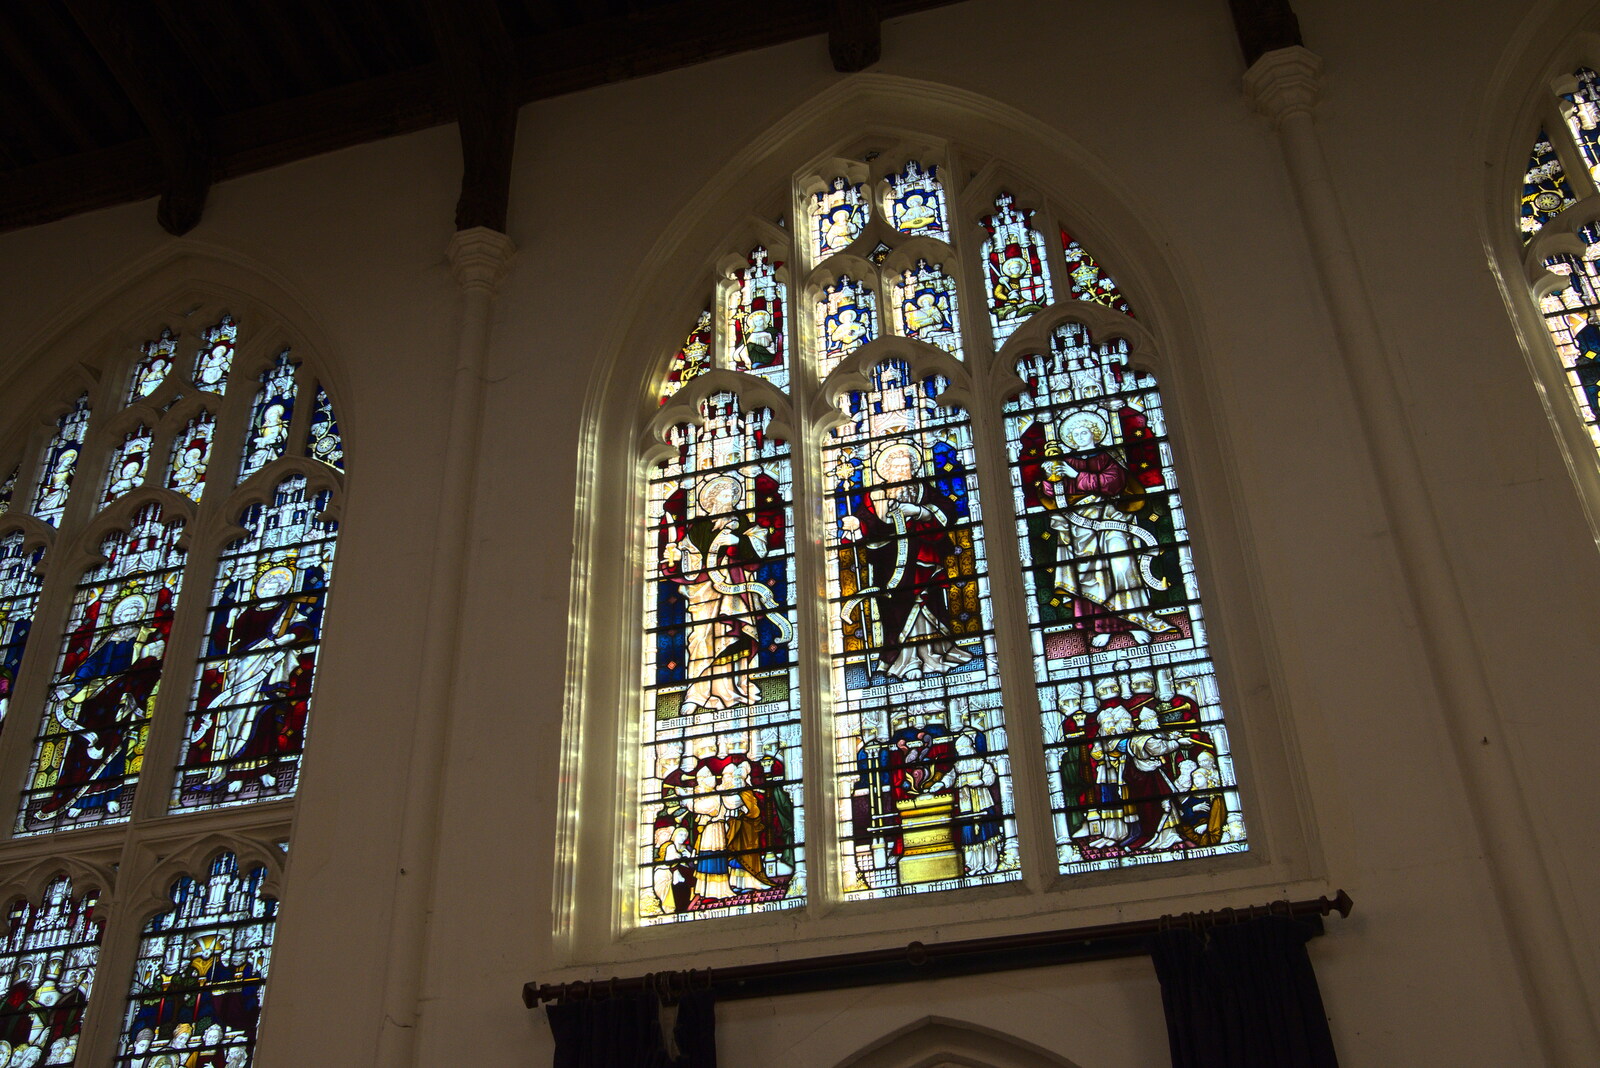 Pizza and Pasta in Bury St. Edmunds, Suffolk - 30th October 2022: Stained glass windows